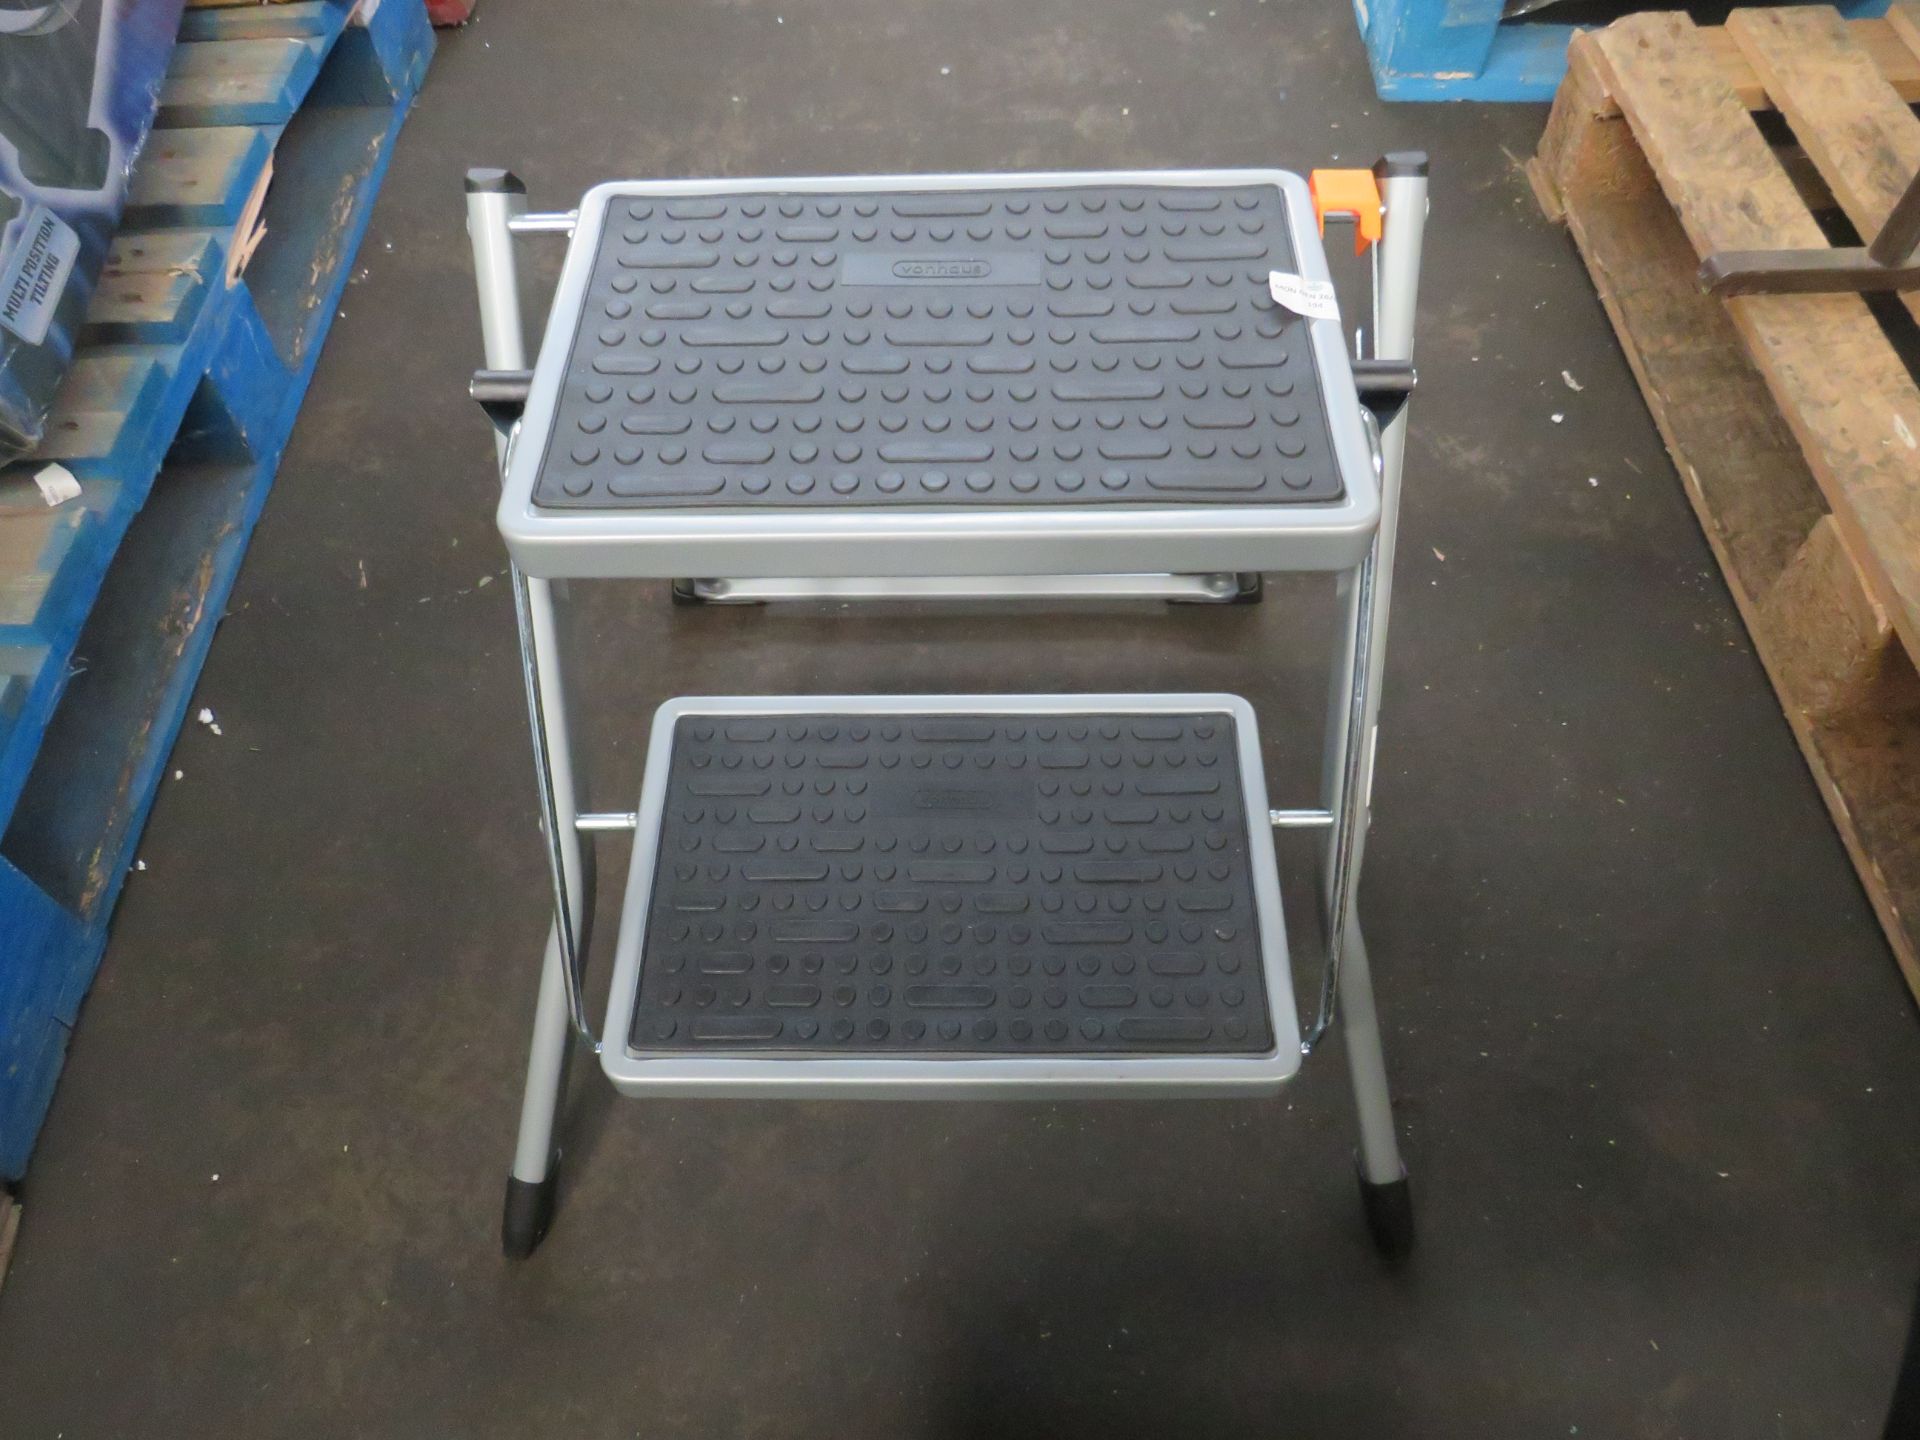 Foldable 2-Step Metal Ladder - Good Condition, No Packaging.